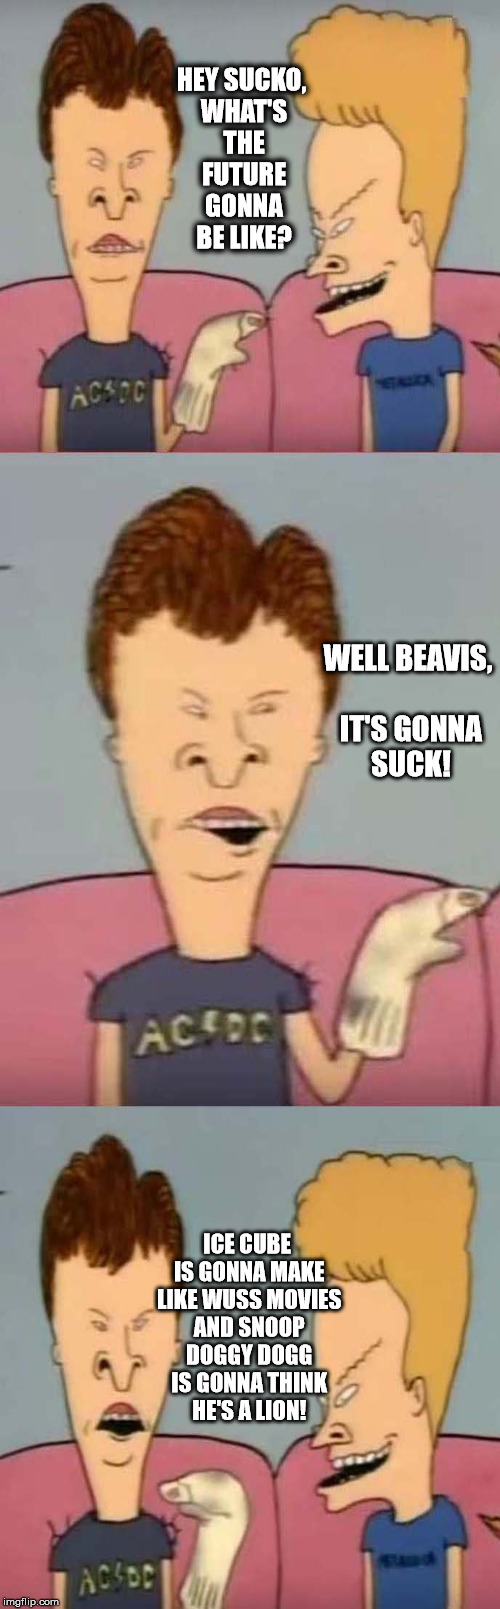 Beavis Future 555 | HEY SUCKO, WHAT'S THE FUTURE GONNA BE LIKE? WELL BEAVIS, IT'S GONNA SUCK! ICE CUBE IS GONNA MAKE LIKE WUSS MOVIES AND SNOOP DOGGY DOGG IS GONNA THINK HE'S A LION! | image tagged in beavis and butthead,future,sleep deprivation creations | made w/ Imgflip meme maker